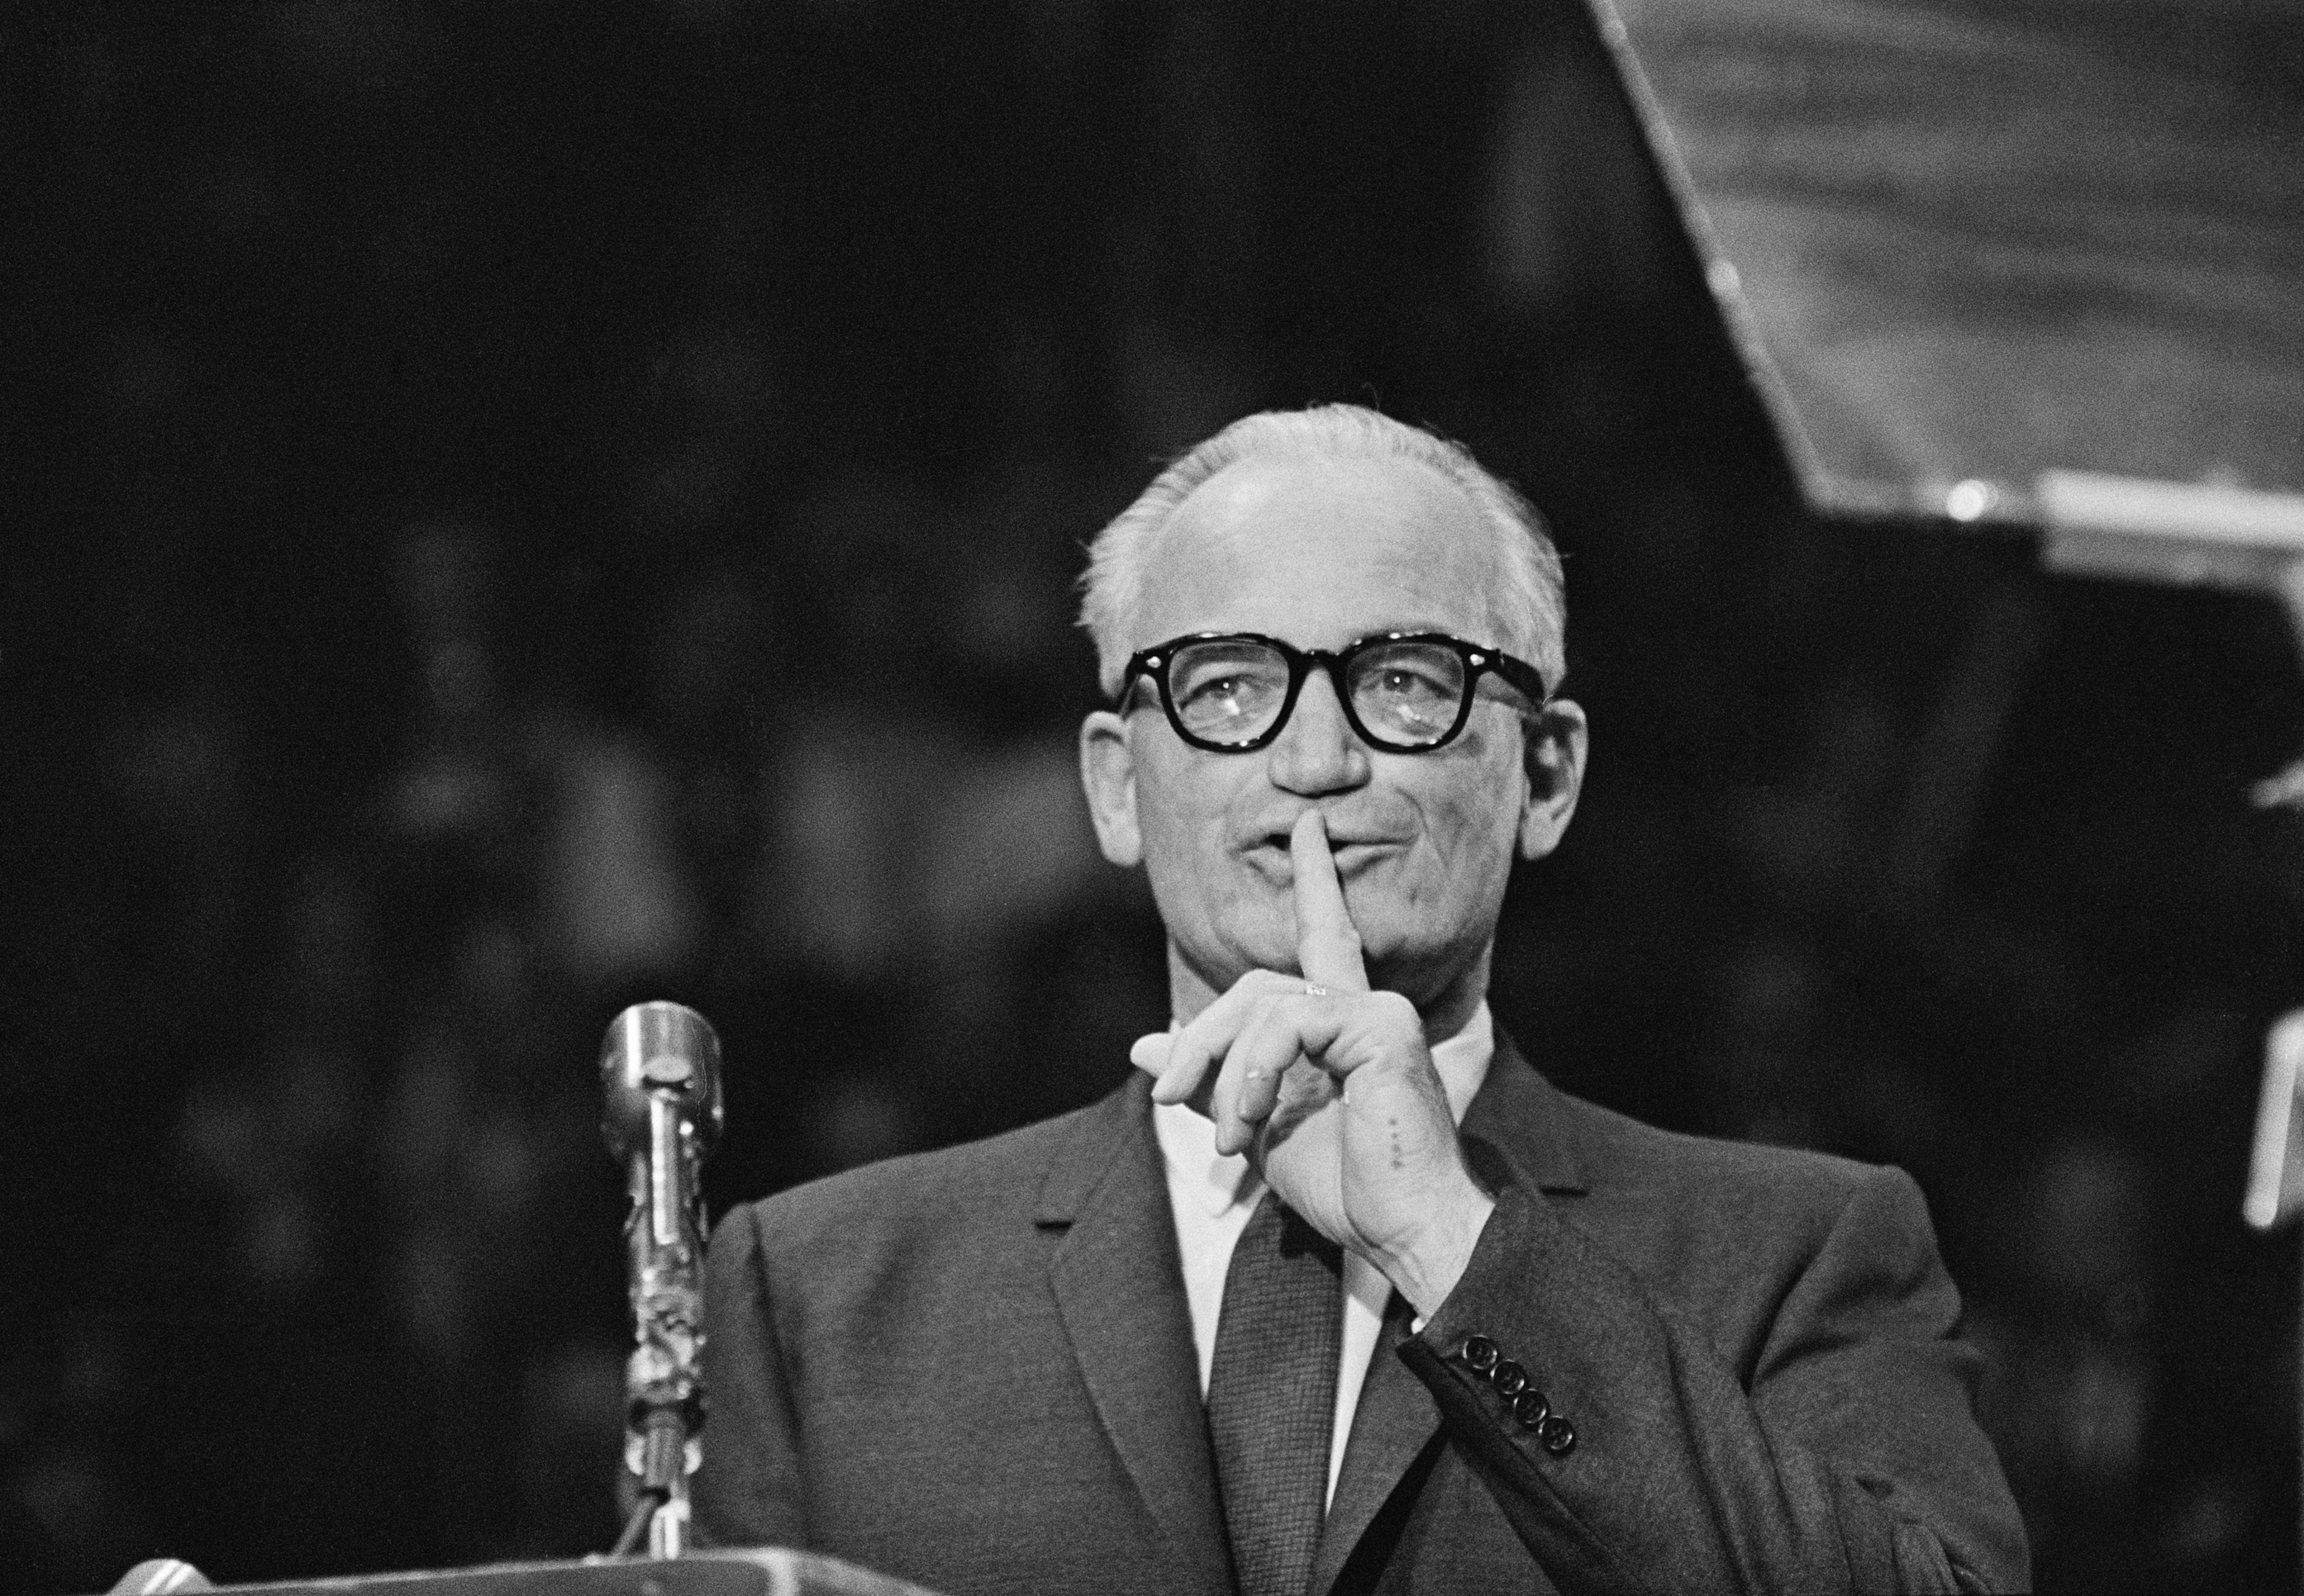 U.S. Senator and nominee for president, Barry Goldwater speaking at an election rally in Madison Square Garden, New York City, on October, 8 1964. (William Lovelace—Getty Images)